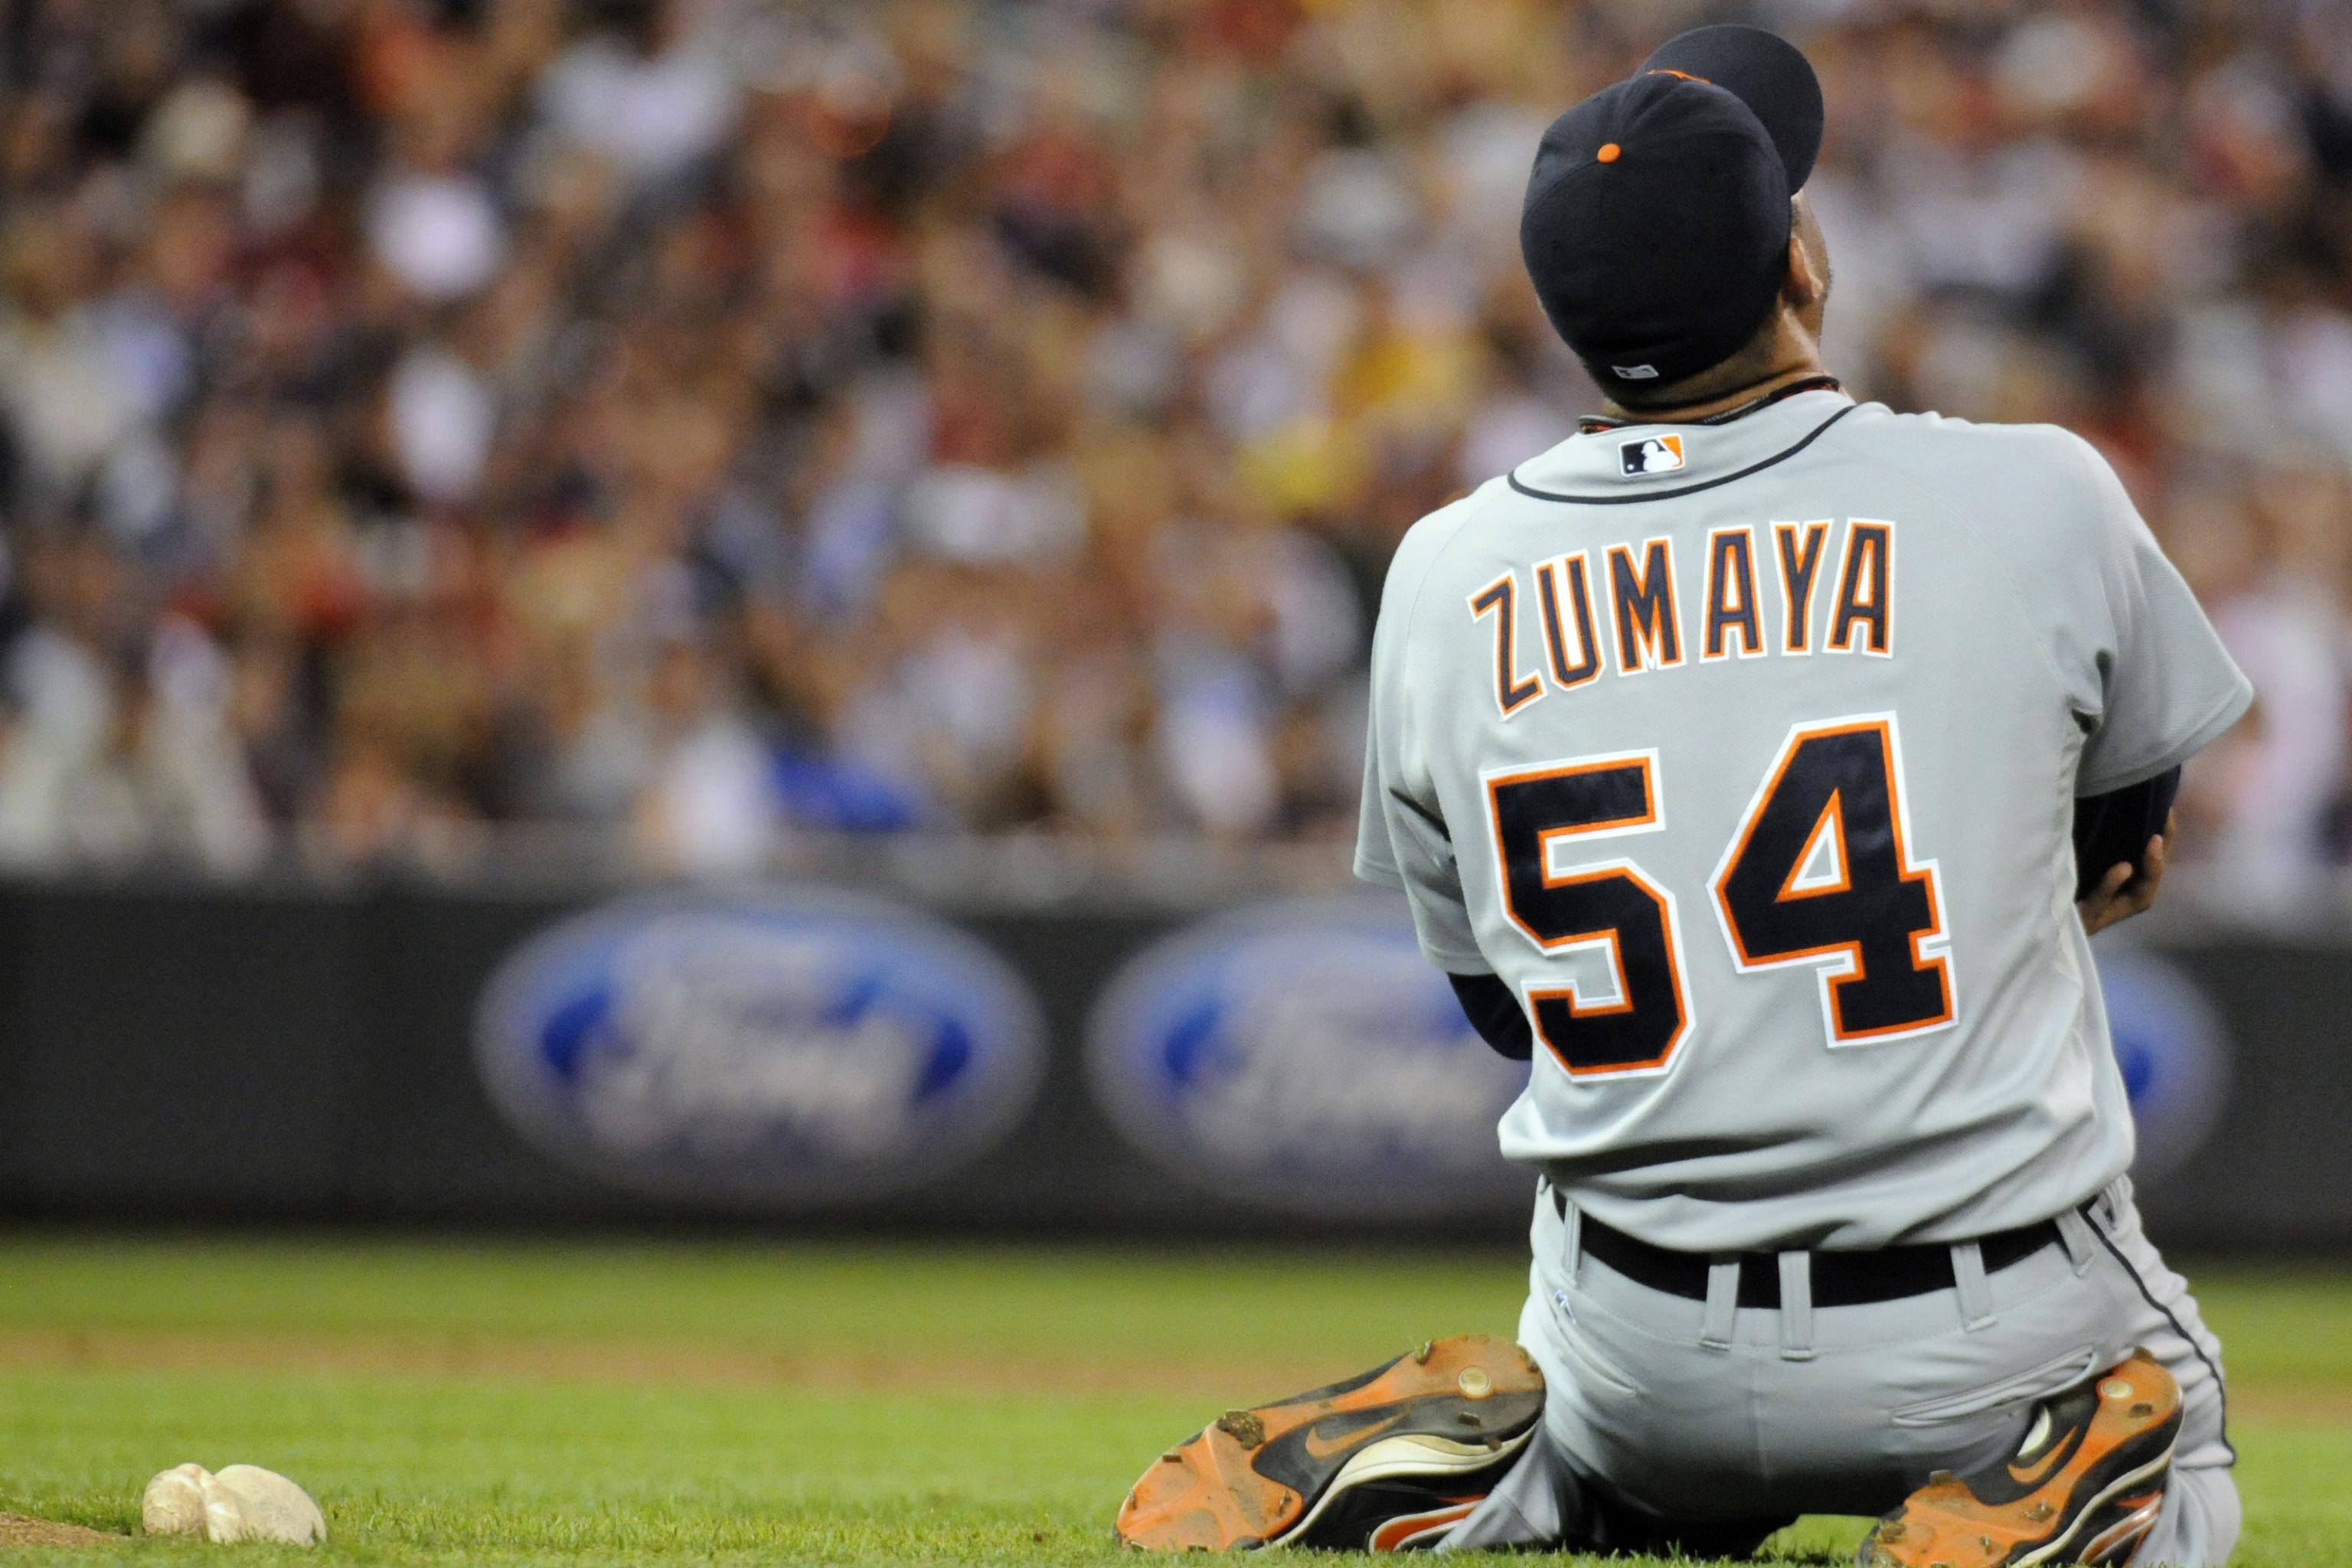 Tigers relief pitcher Joel Zumaya to undergo surgery to find problem with  elbow